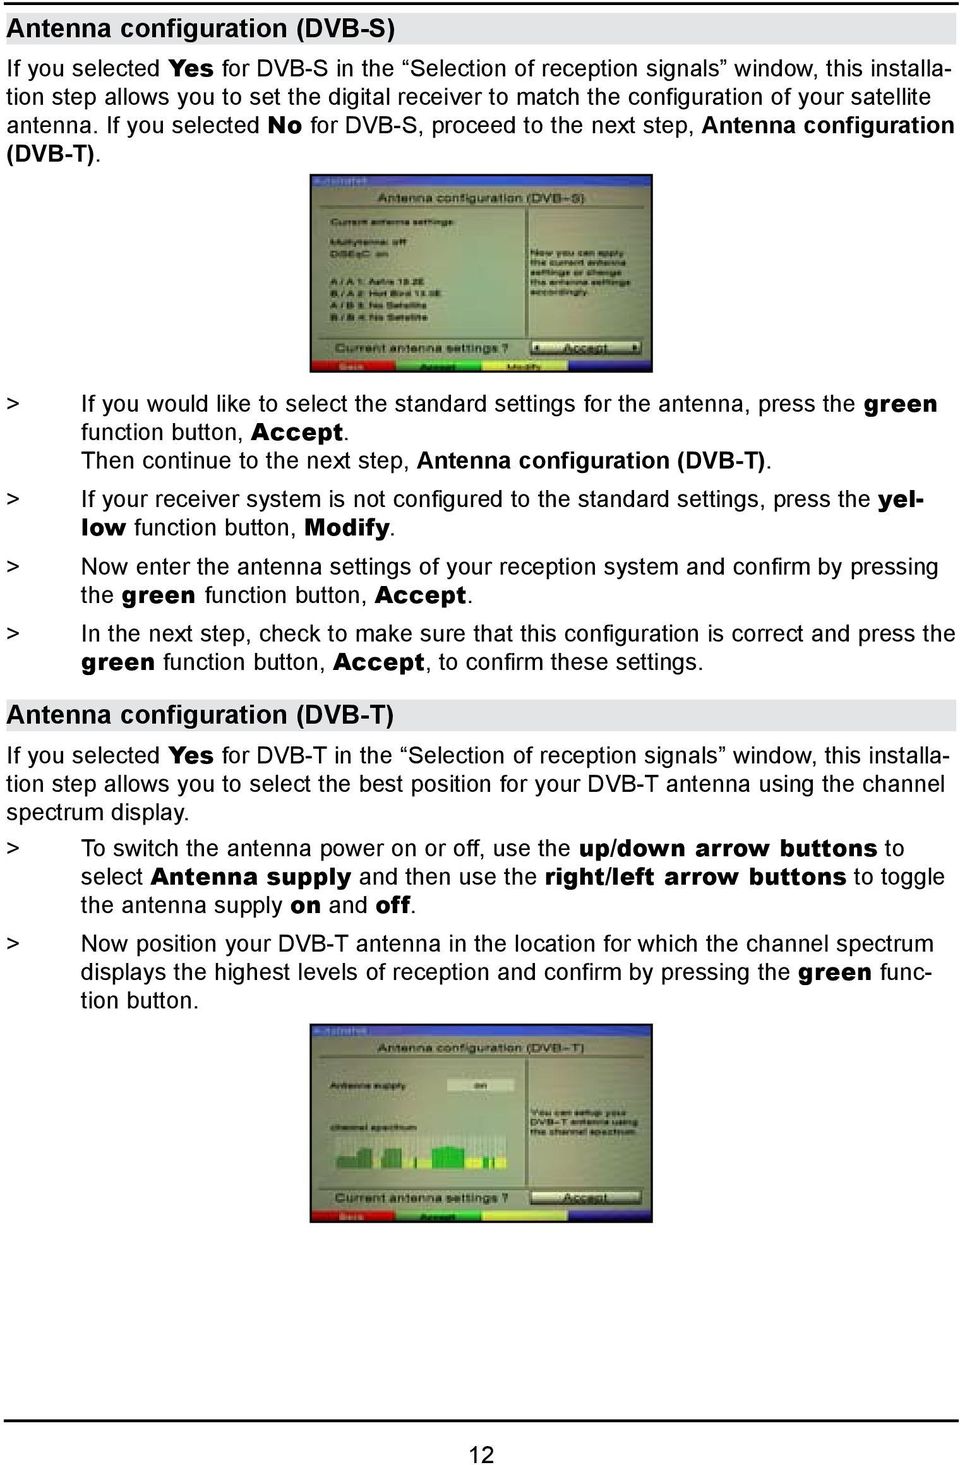 > If you would like to select the standard settings for the antenna, press the green function button, Accept. Then continue to the next step, Antenna configuration (DVB-T).